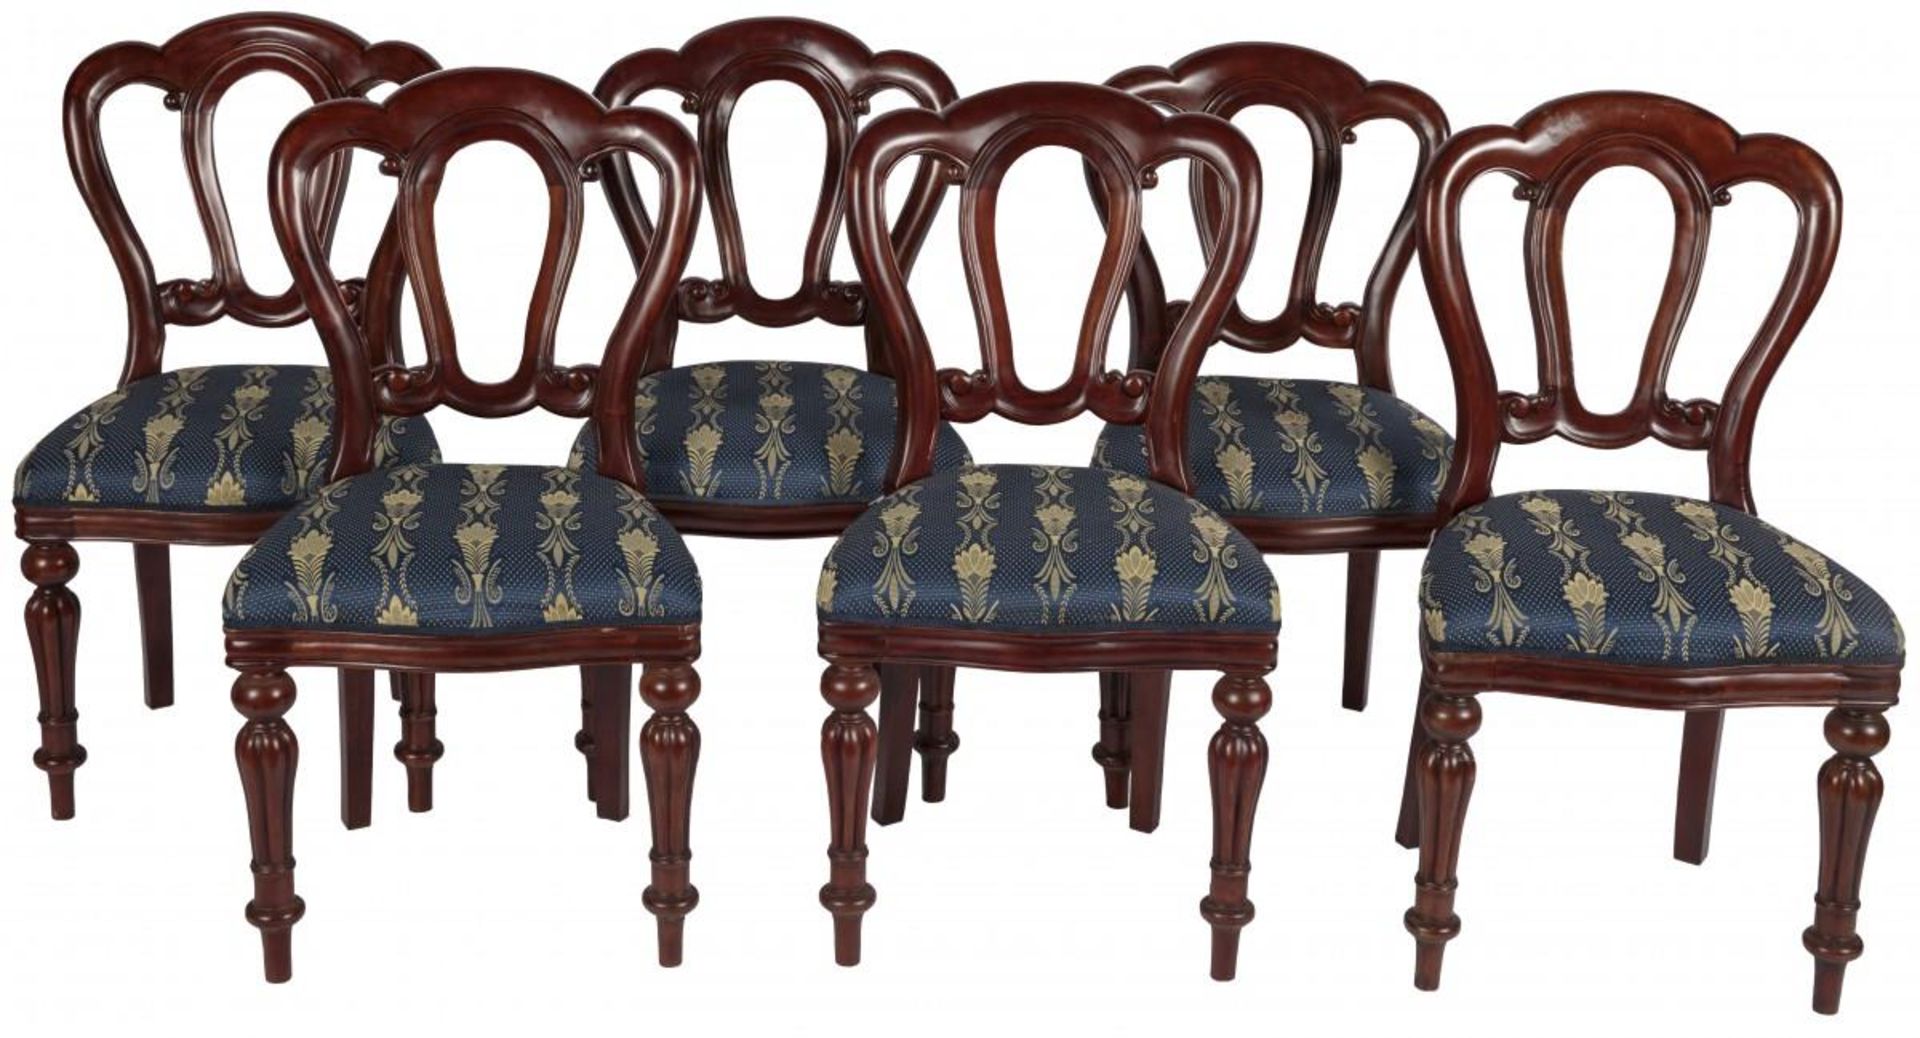 A set of (6) Willem III / Victorian style dining chairs, England, 20th century.